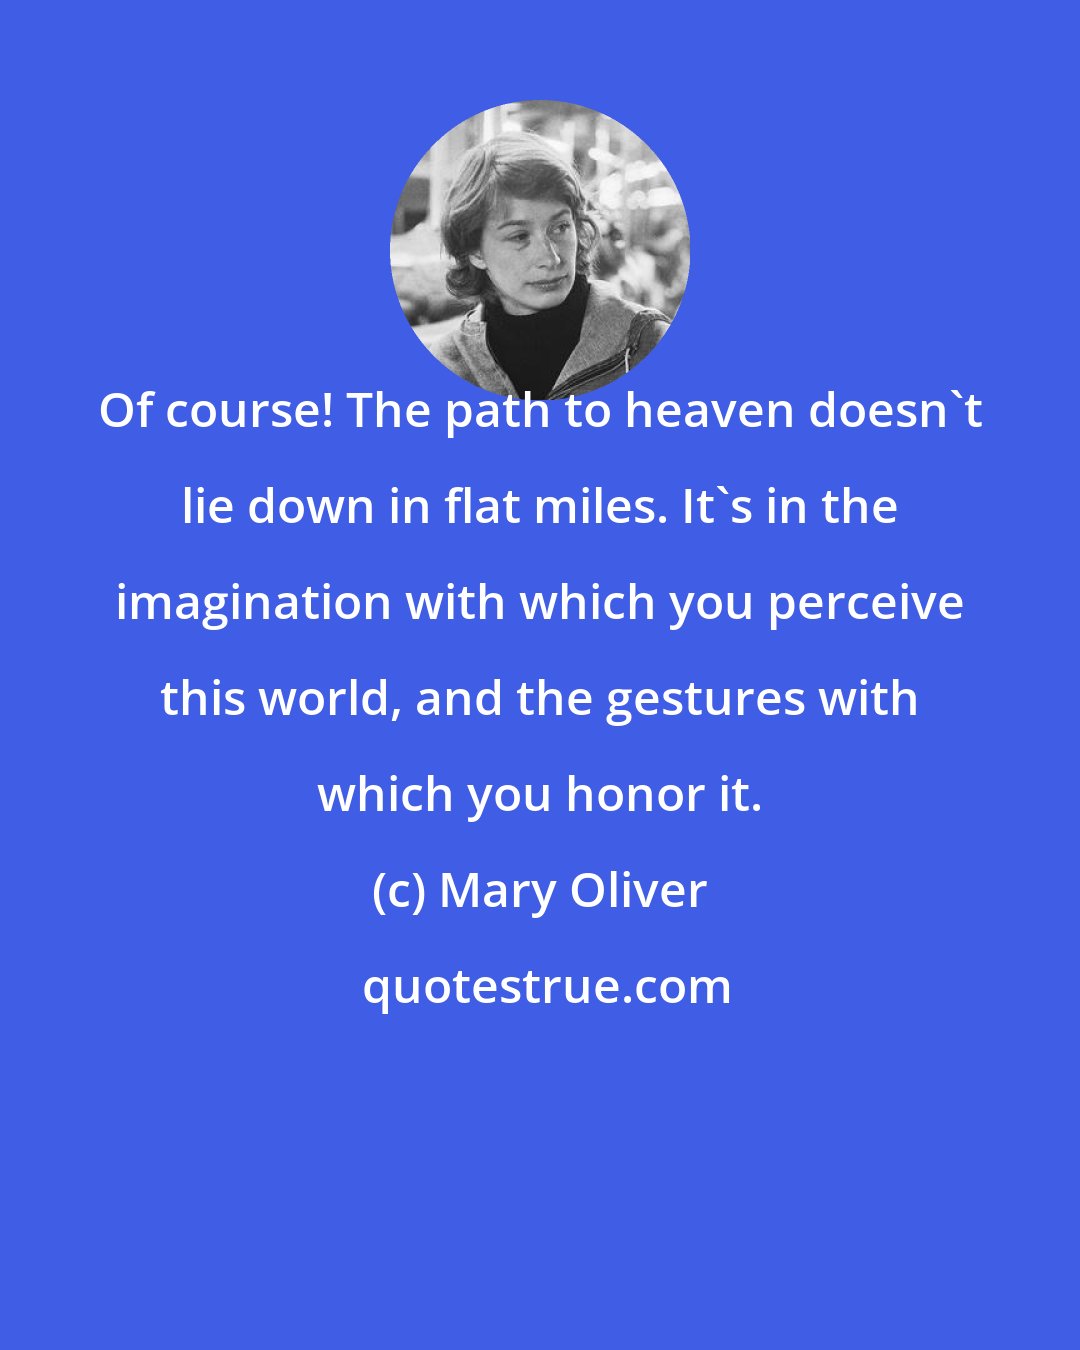 Mary Oliver: Of course! The path to heaven doesn't lie down in flat miles. It's in the imagination with which you perceive this world, and the gestures with which you honor it.